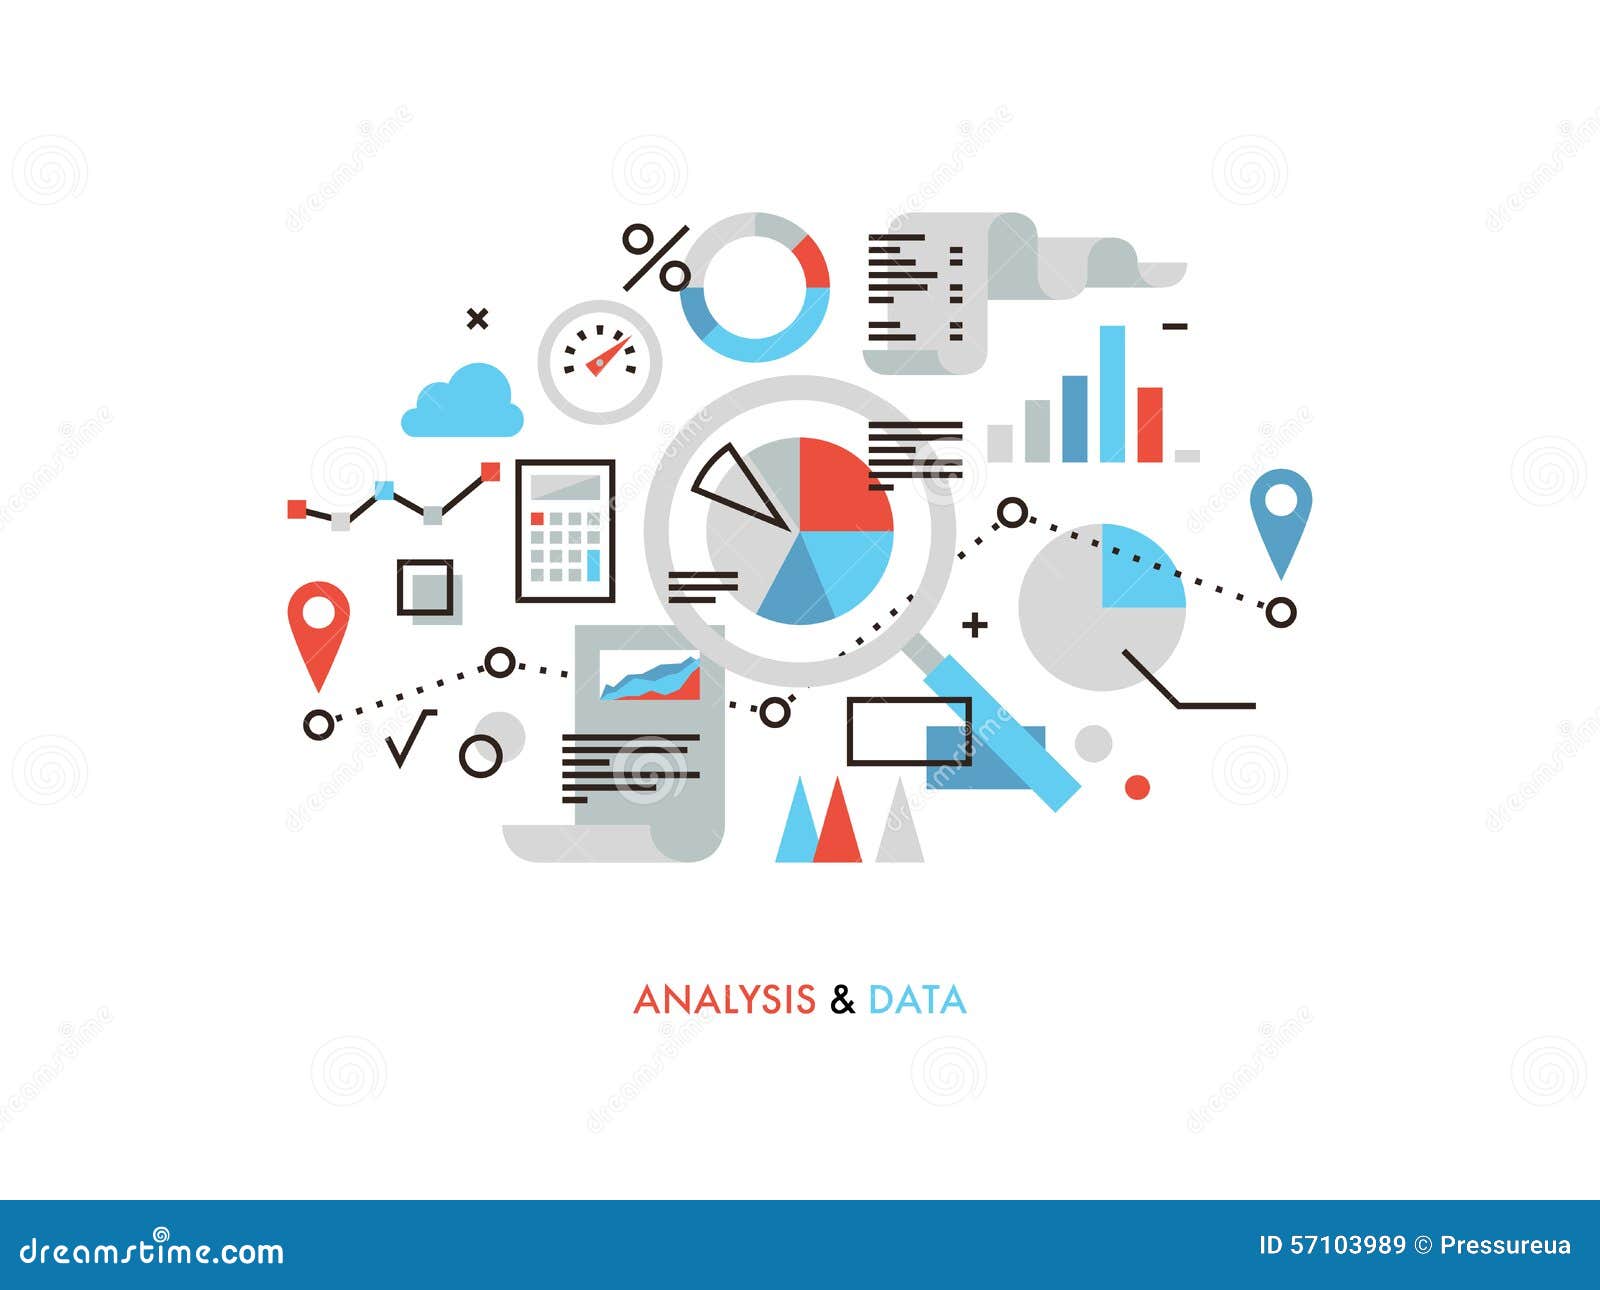 business analysis clipart - photo #48